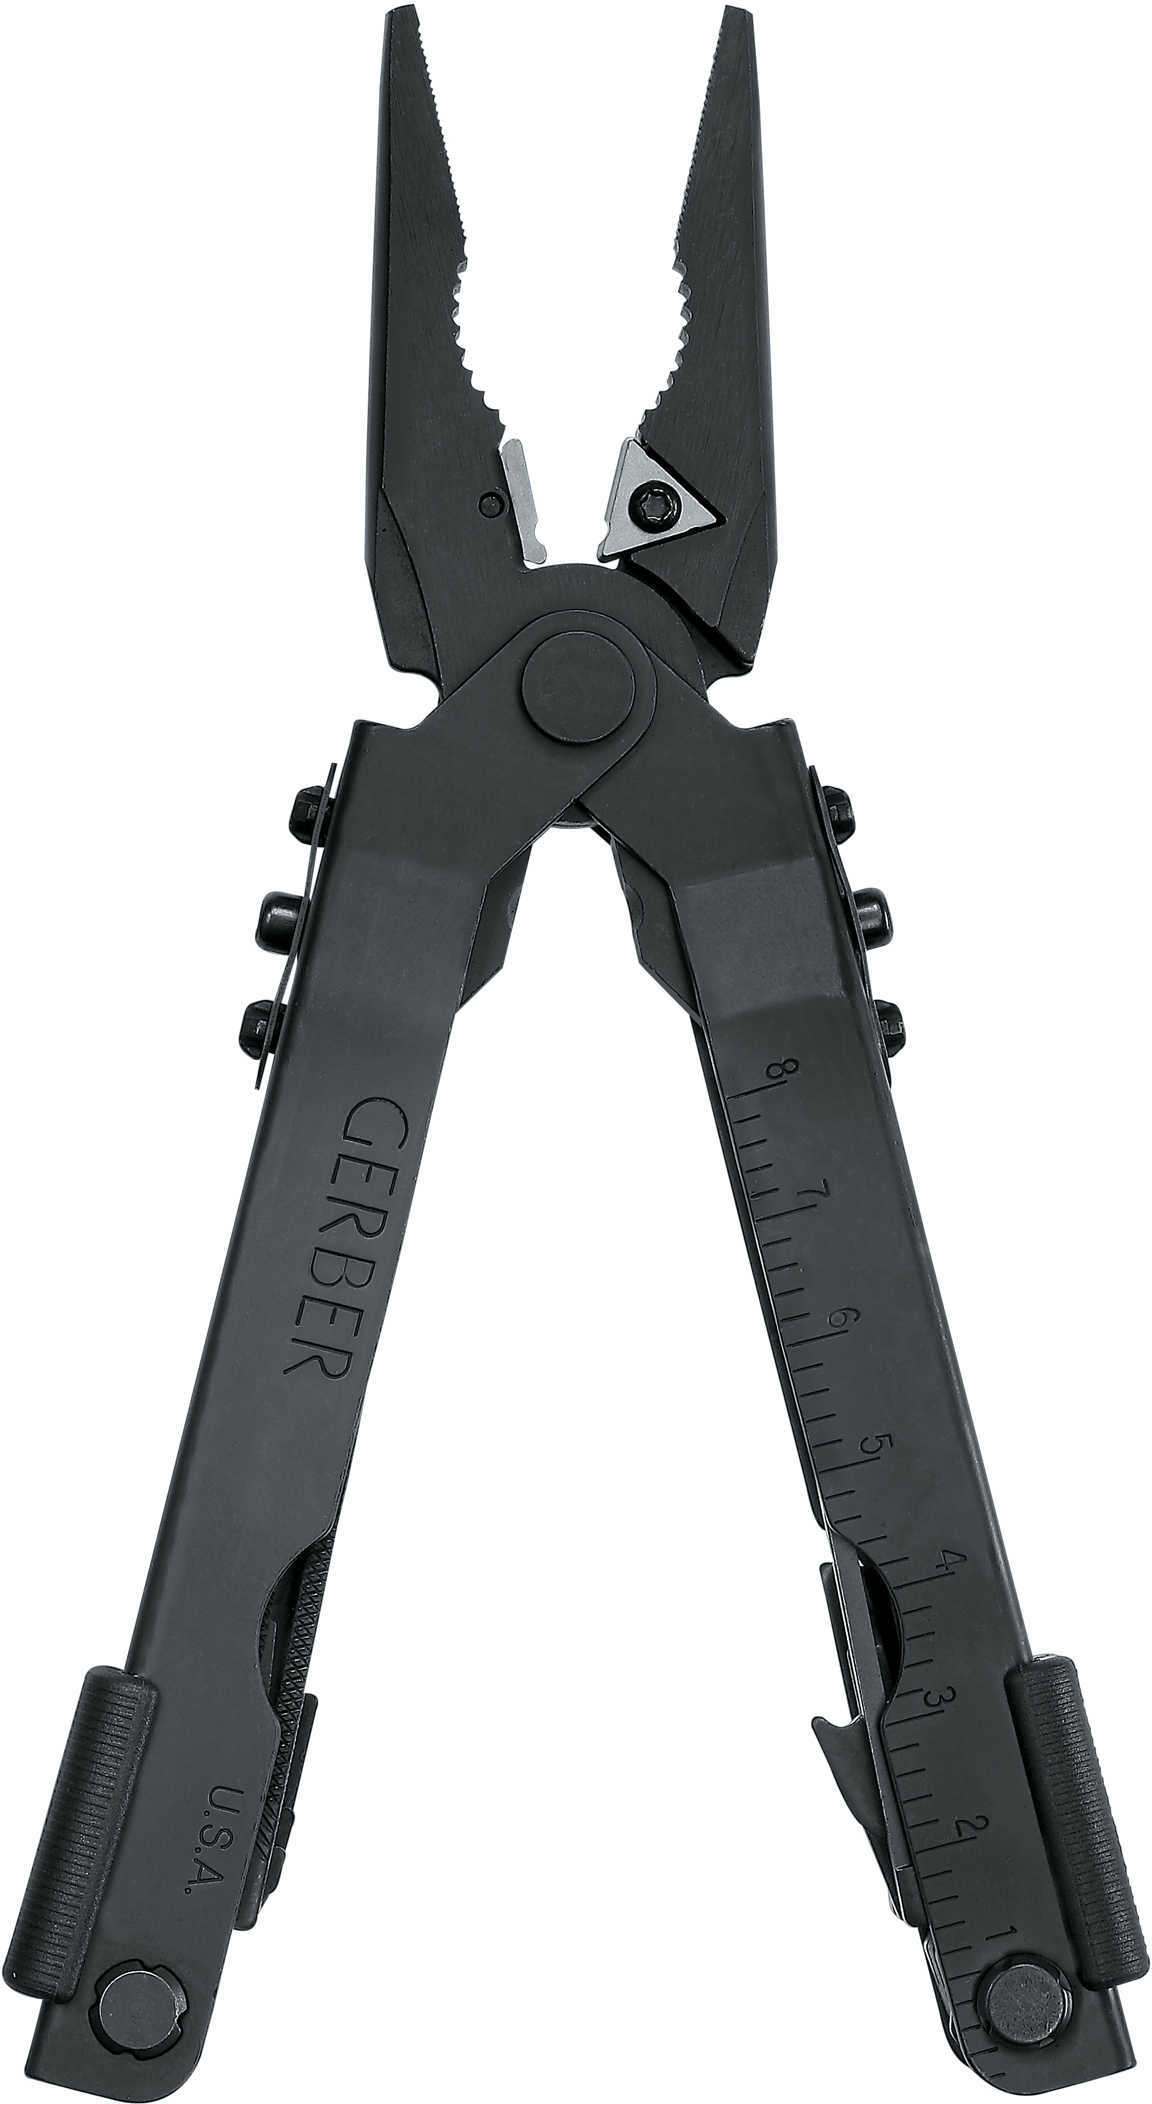 Gerber Multi-plier 600 With 15 Tools